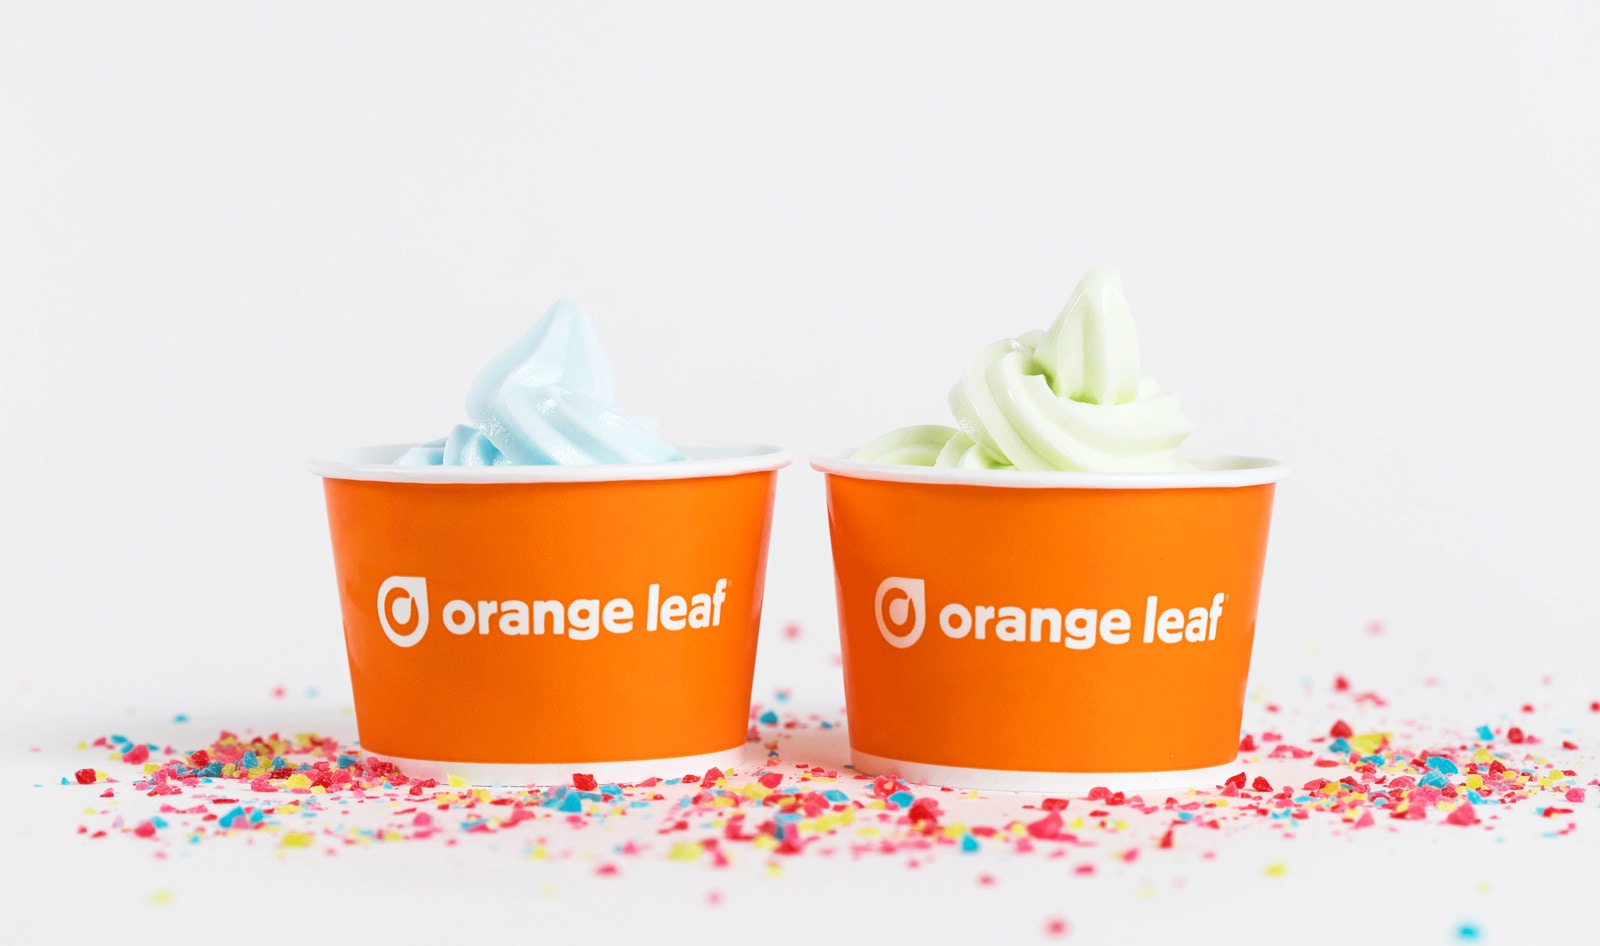 Froyo Chain Credits Vegan Jolly Rancher Soft Serve for Sales Spike